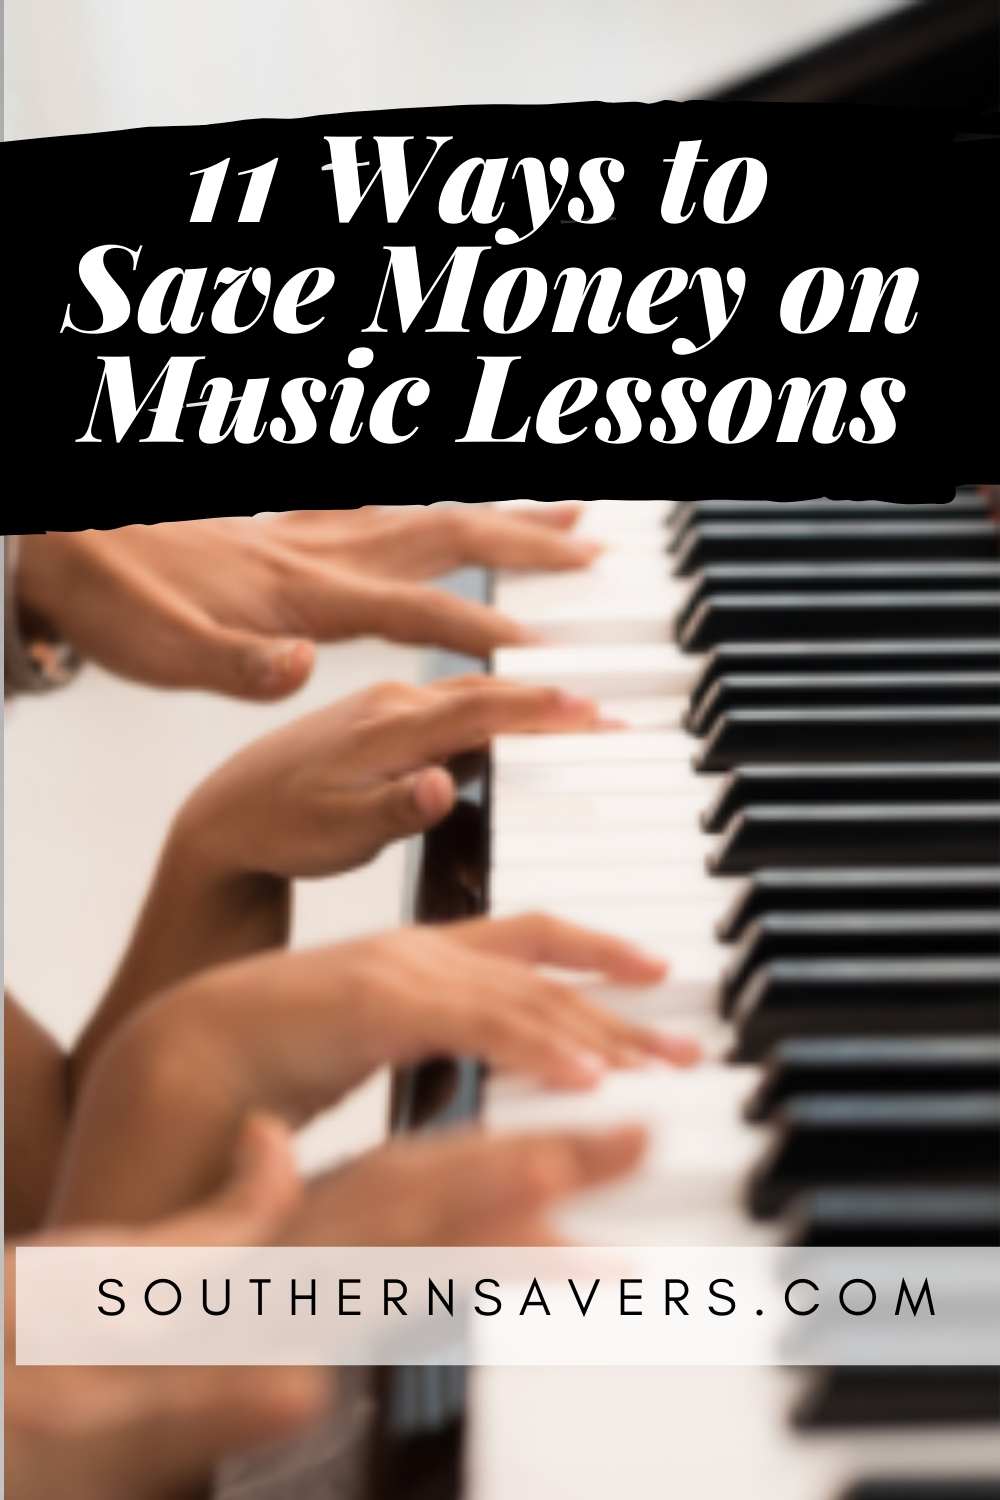 Private music lessons may seem out of your budget, but here are 10 ways to save money on music lessons and give your kids a great musical start!